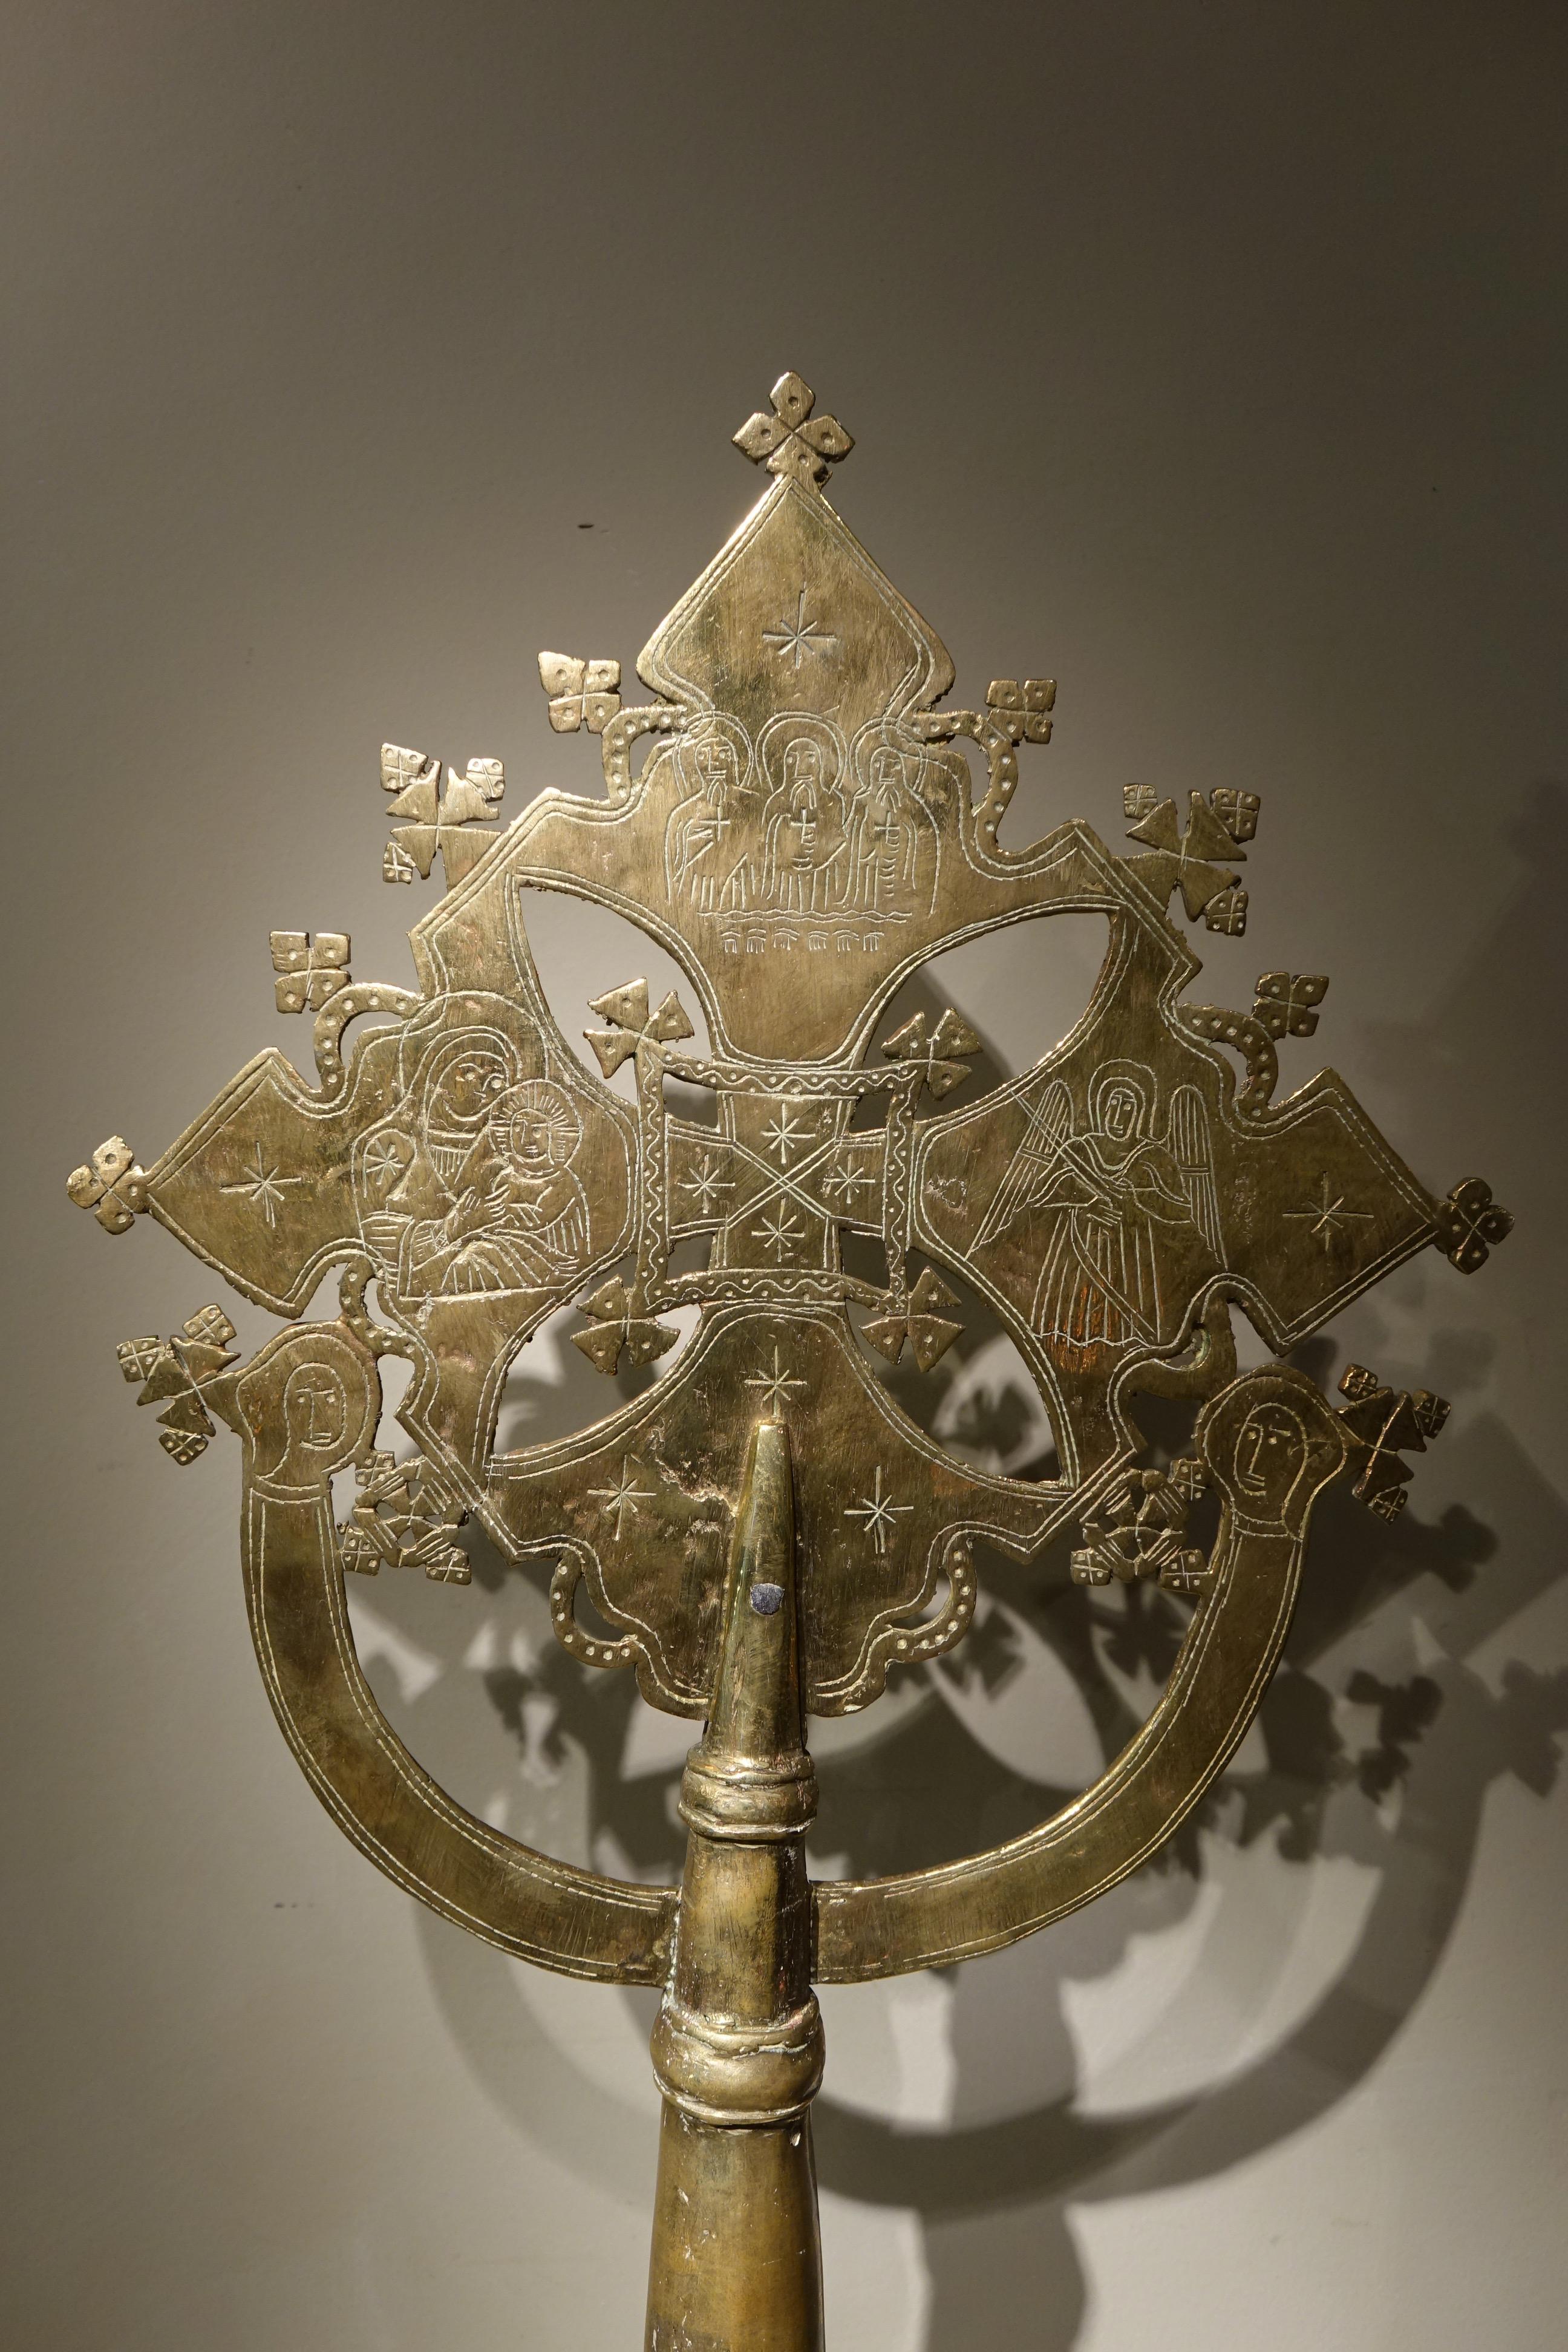 Large processional cross in gilt brass, with openwork and engraved decoration featuring the Virgin Mary, the Infant Jesus, saints and angels.
There are many forms of cross, depending on the region or city: the cross of Lalibela, Gondar, Aksoum.
They